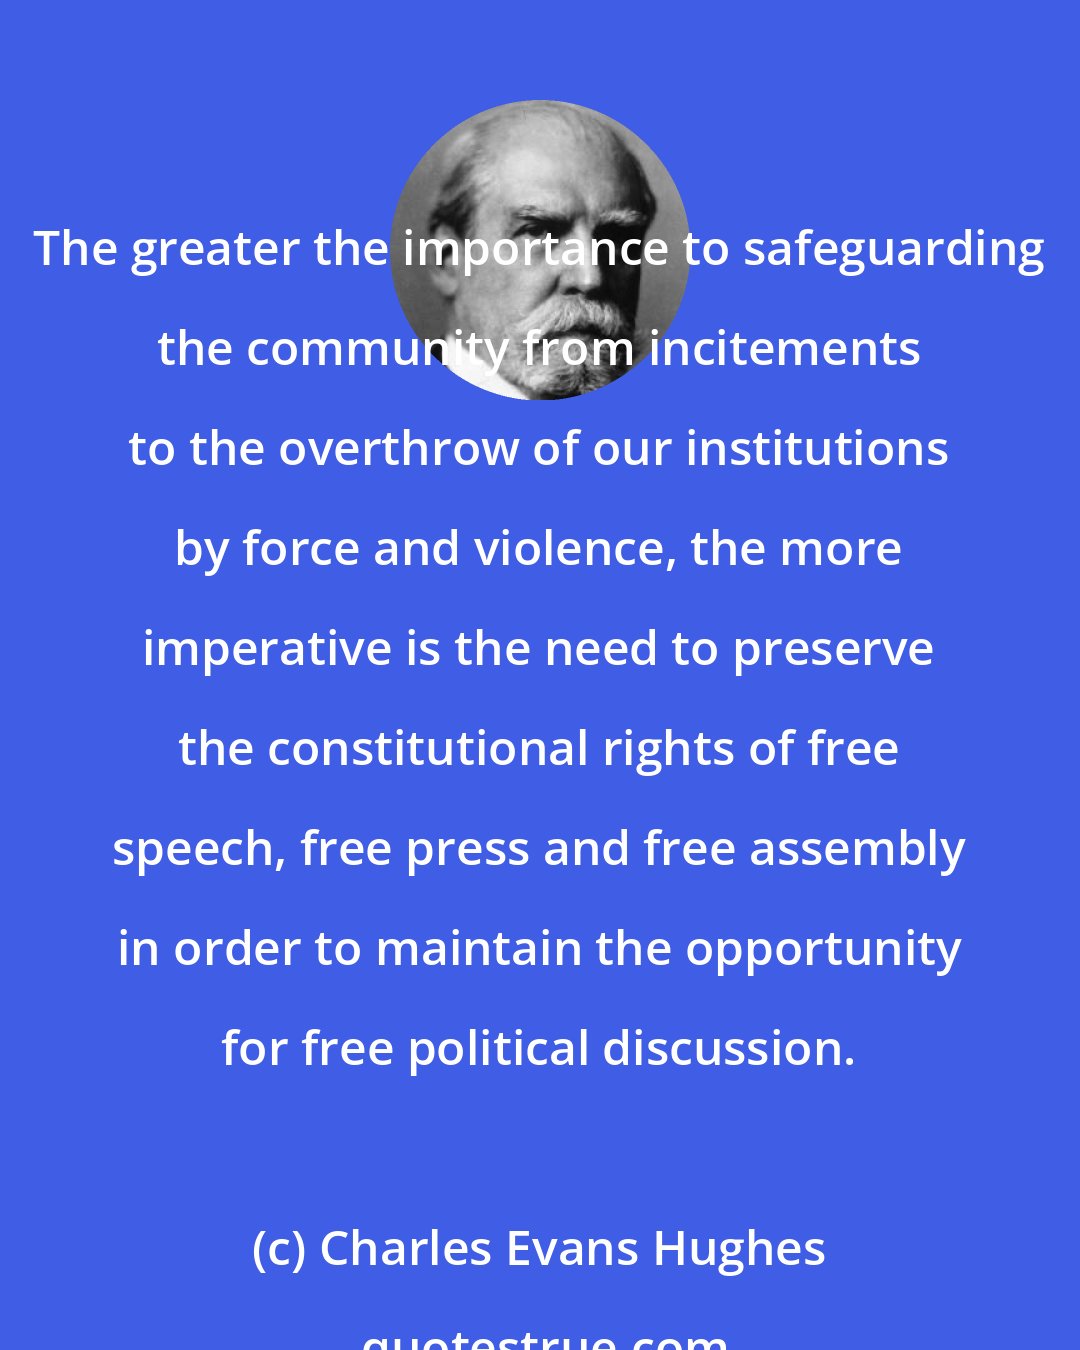 Charles Evans Hughes: The greater the importance to safeguarding the community from incitements to the overthrow of our institutions by force and violence, the more imperative is the need to preserve the constitutional rights of free speech, free press and free assembly in order to maintain the opportunity for free political discussion.